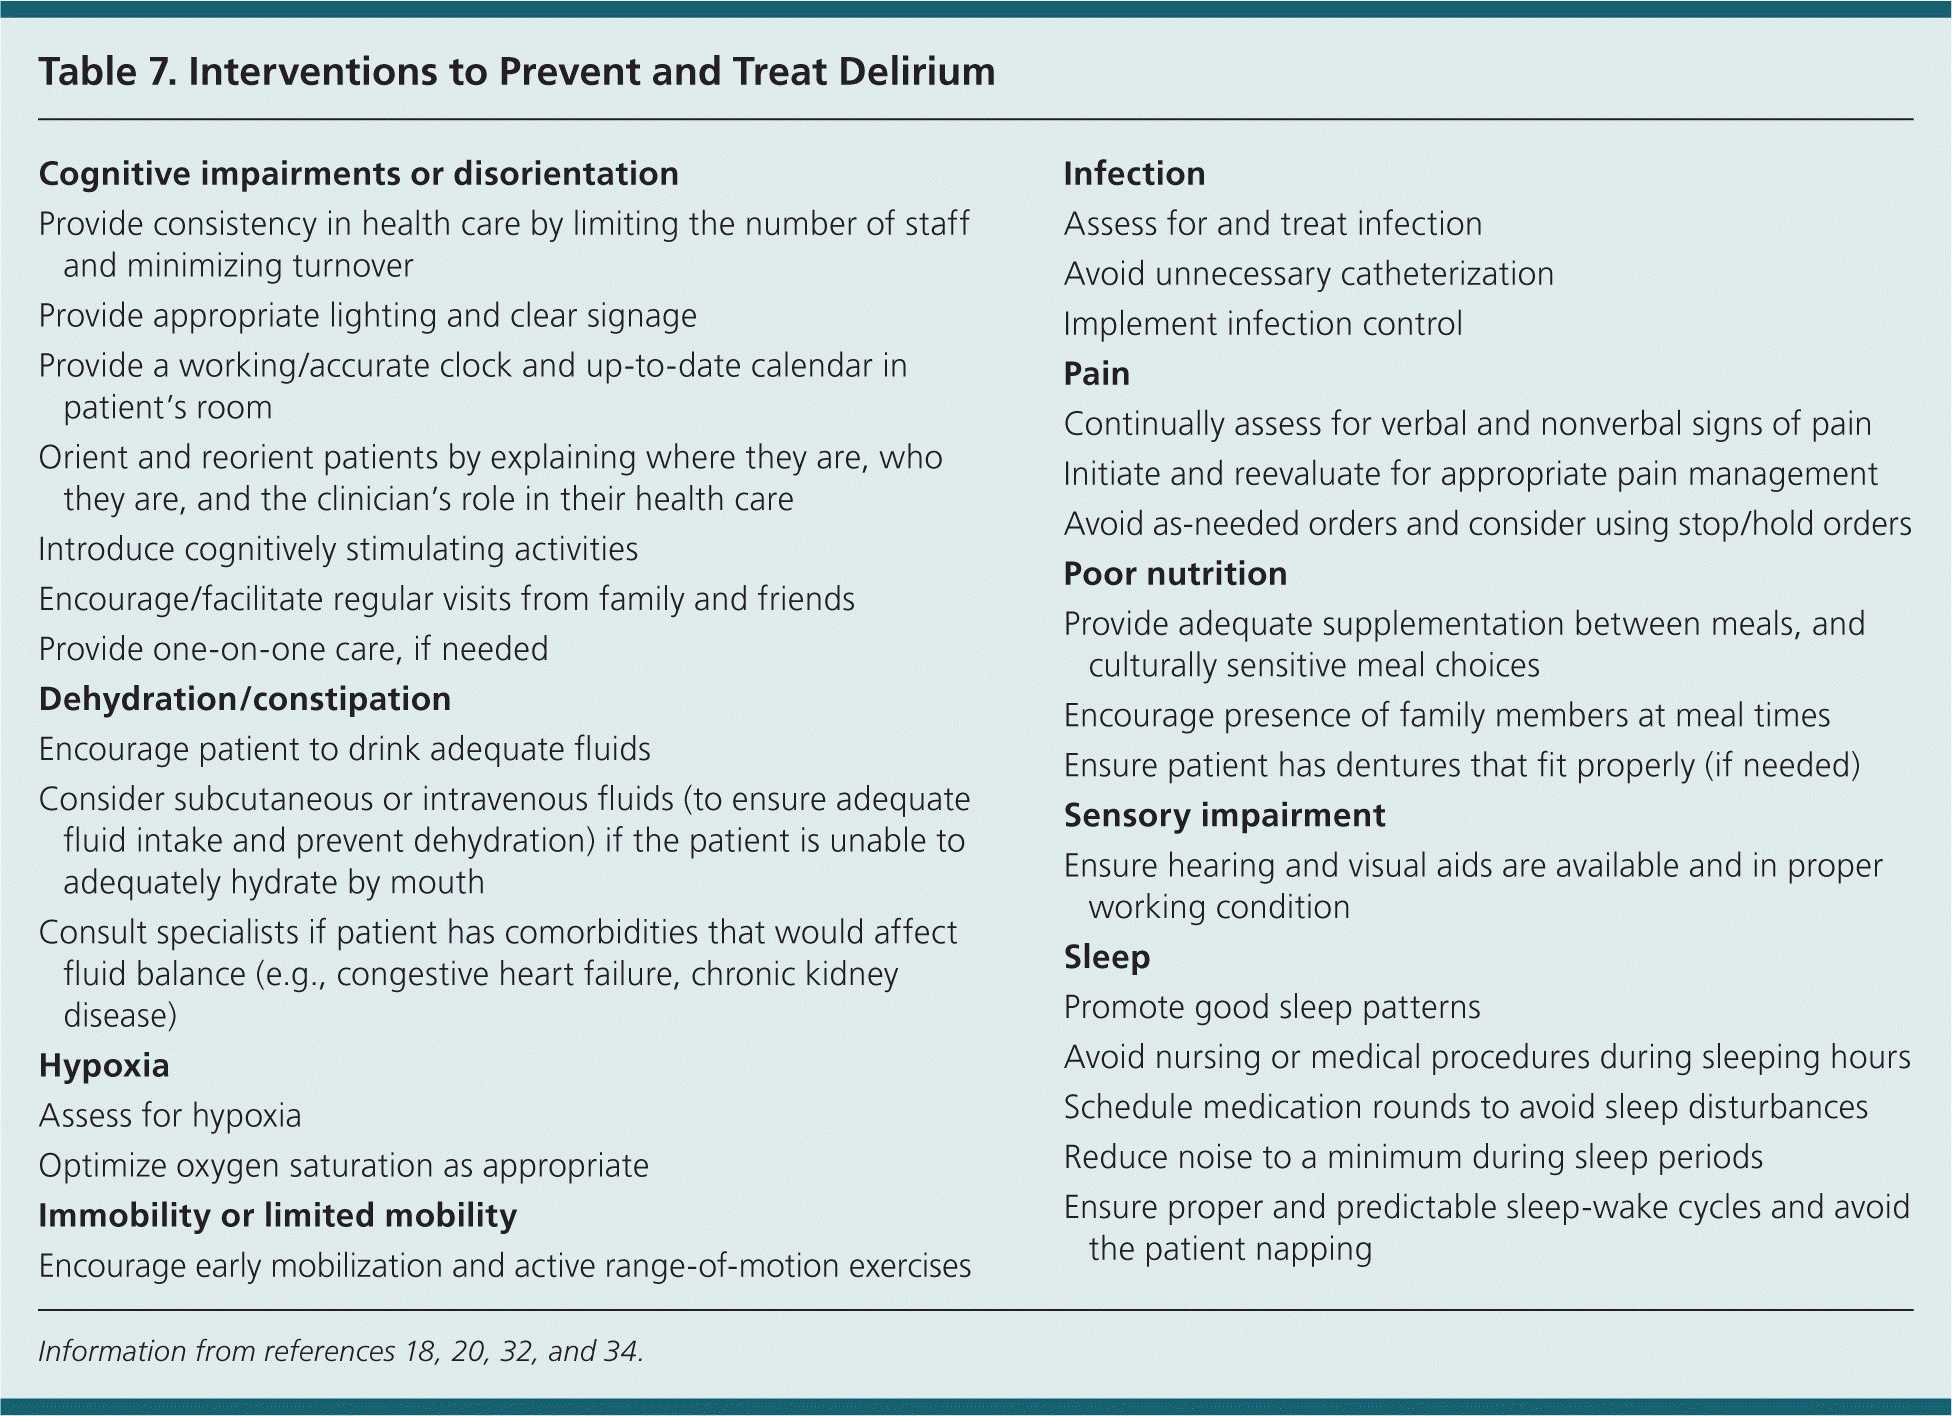 Identifying Parts Of Speech Worksheet Also Delirium In Older Persons Evaluation and Management American